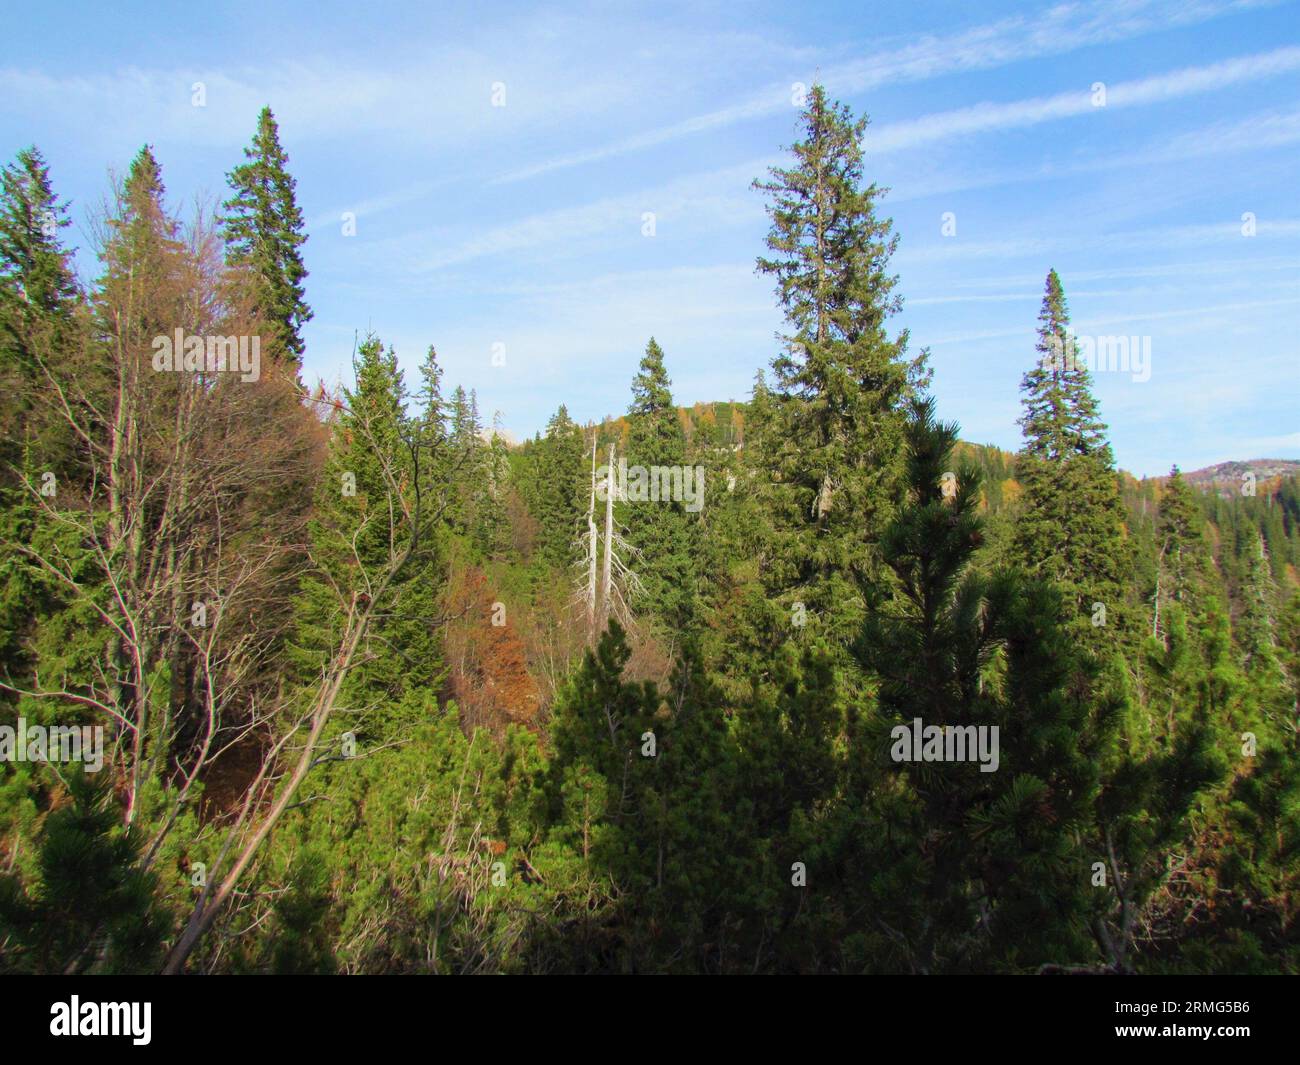 Landscape covered in spruce trees and creeping pine with standing dead trees or snag in the middle at Komna in Triglav national park and Julian alps i Stock Photo